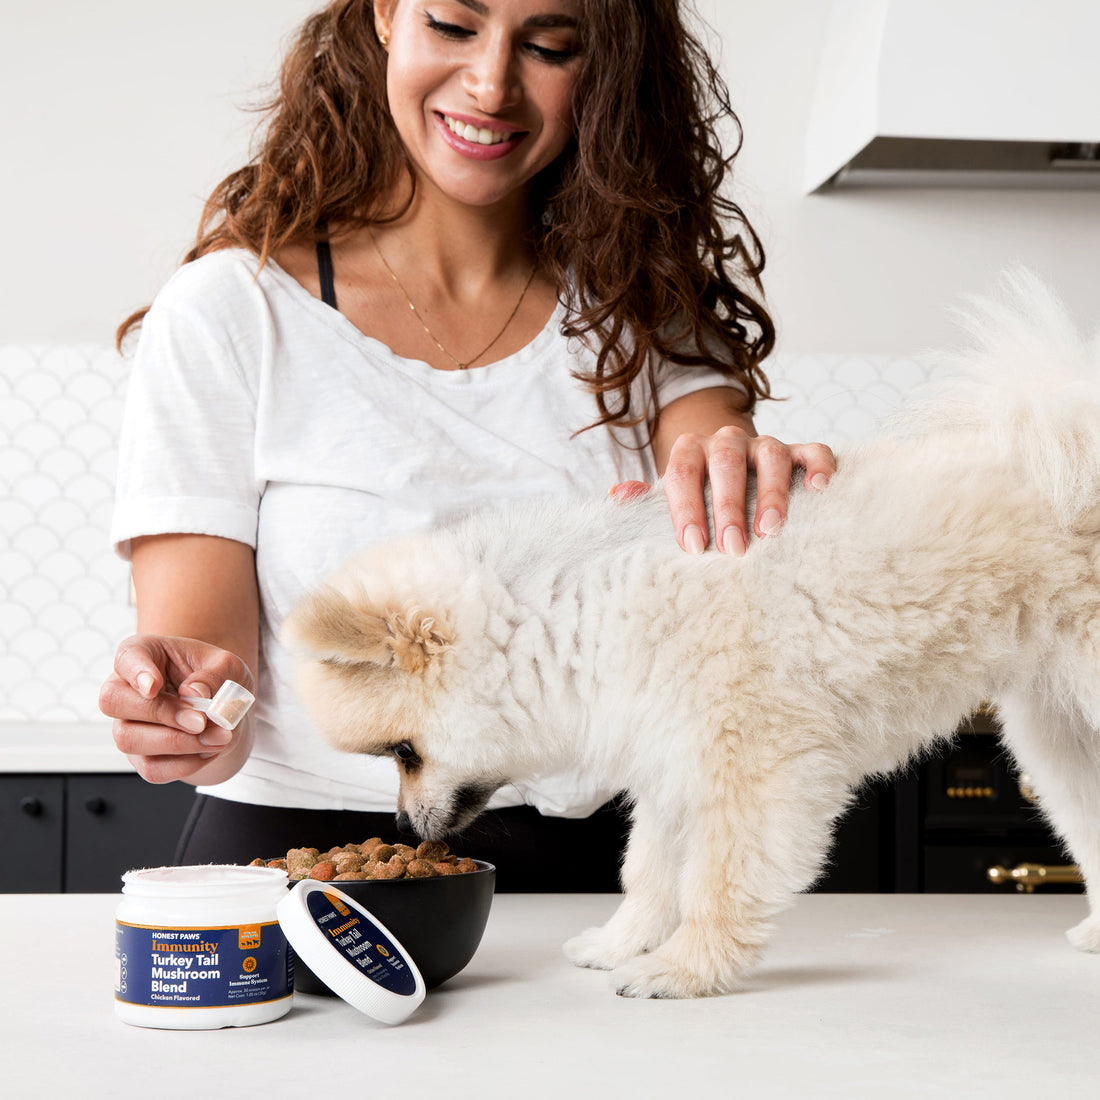 30 year old woman with brown curly hair pouring turkey tail mushroom powder on bowl of food for pomeranian